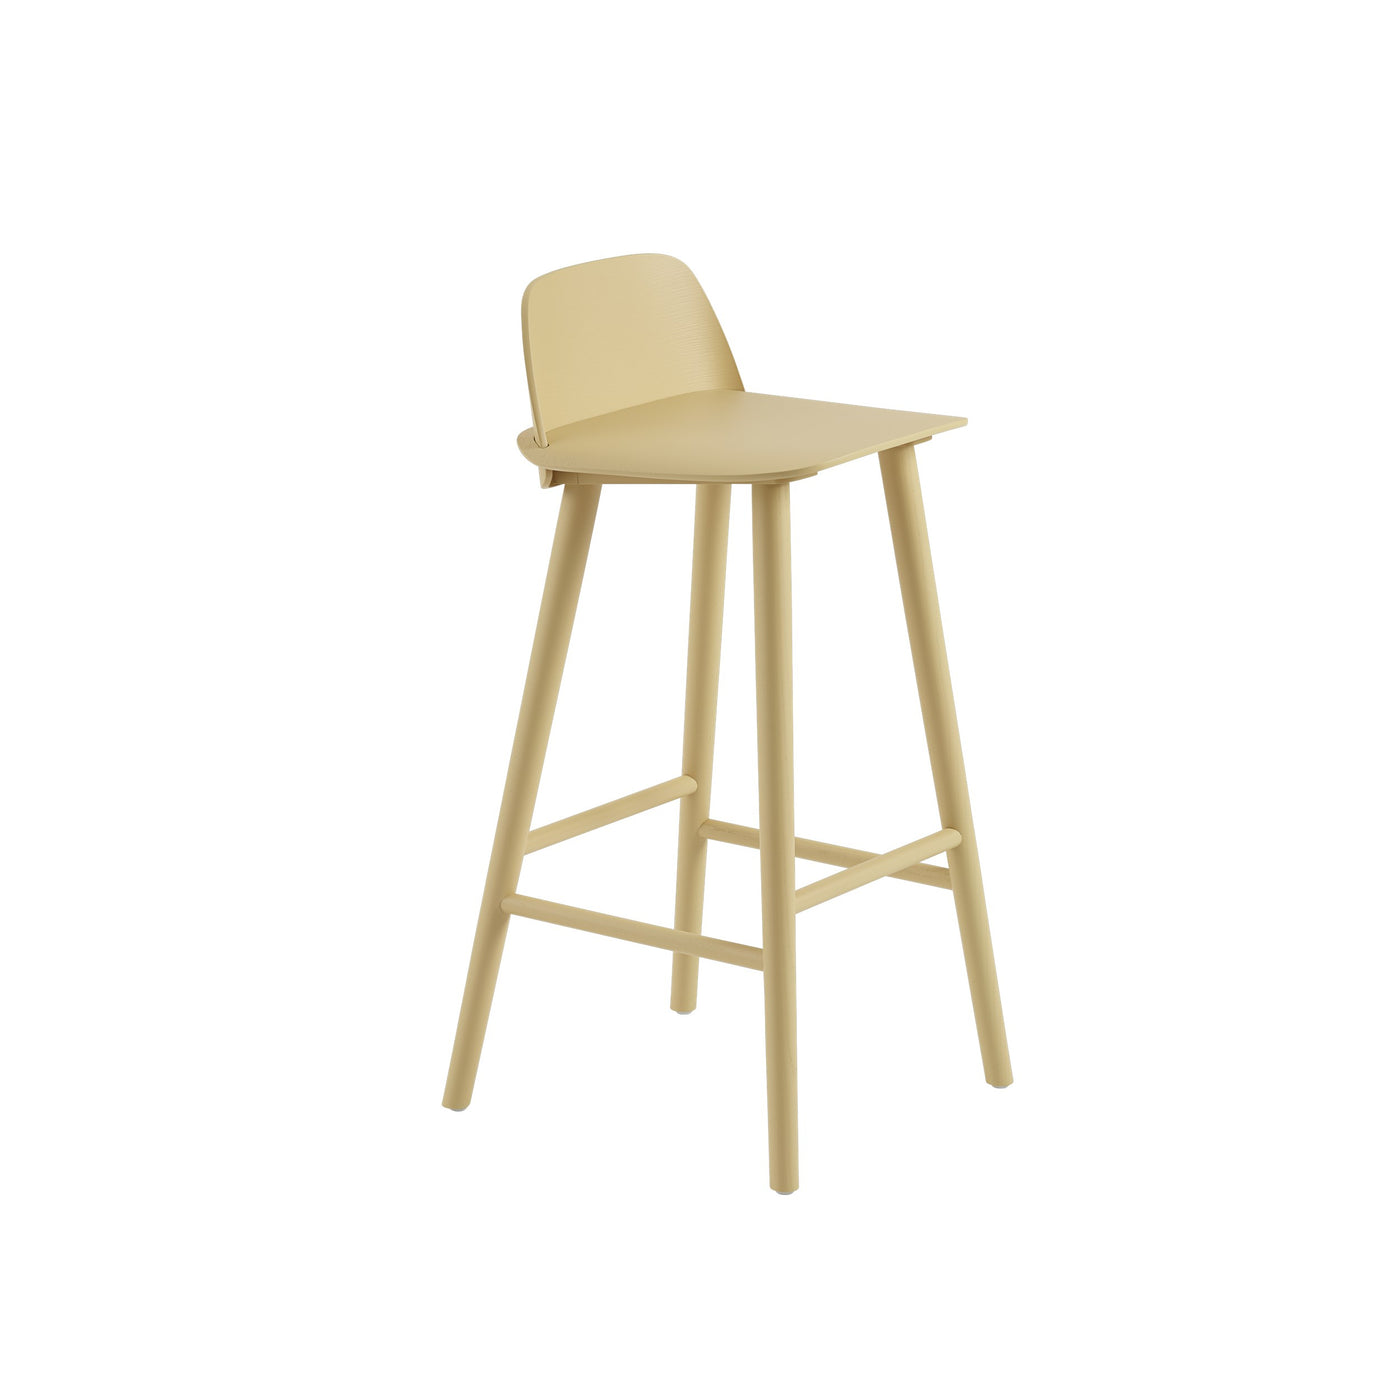 Muuto Nerd Bar stool. Shop online at someday designs. #colour_sand-yellow